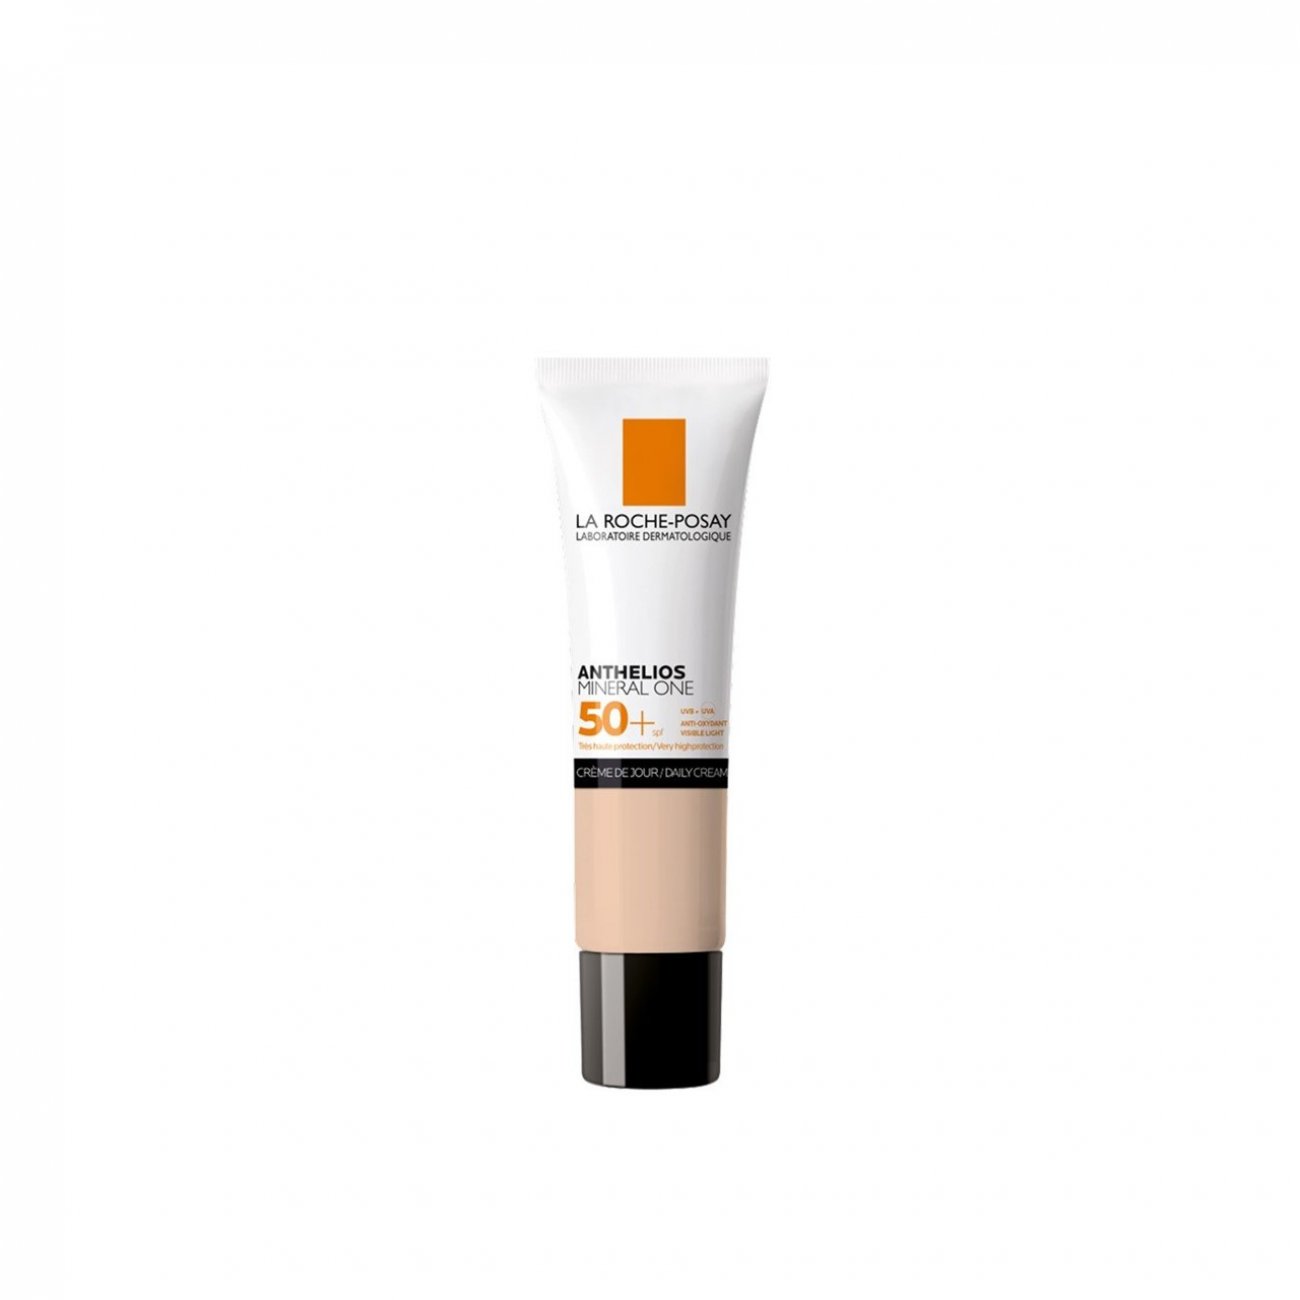 Buy La Roche-Posay Anthelios Mineral One SPF50+ 30ml ·